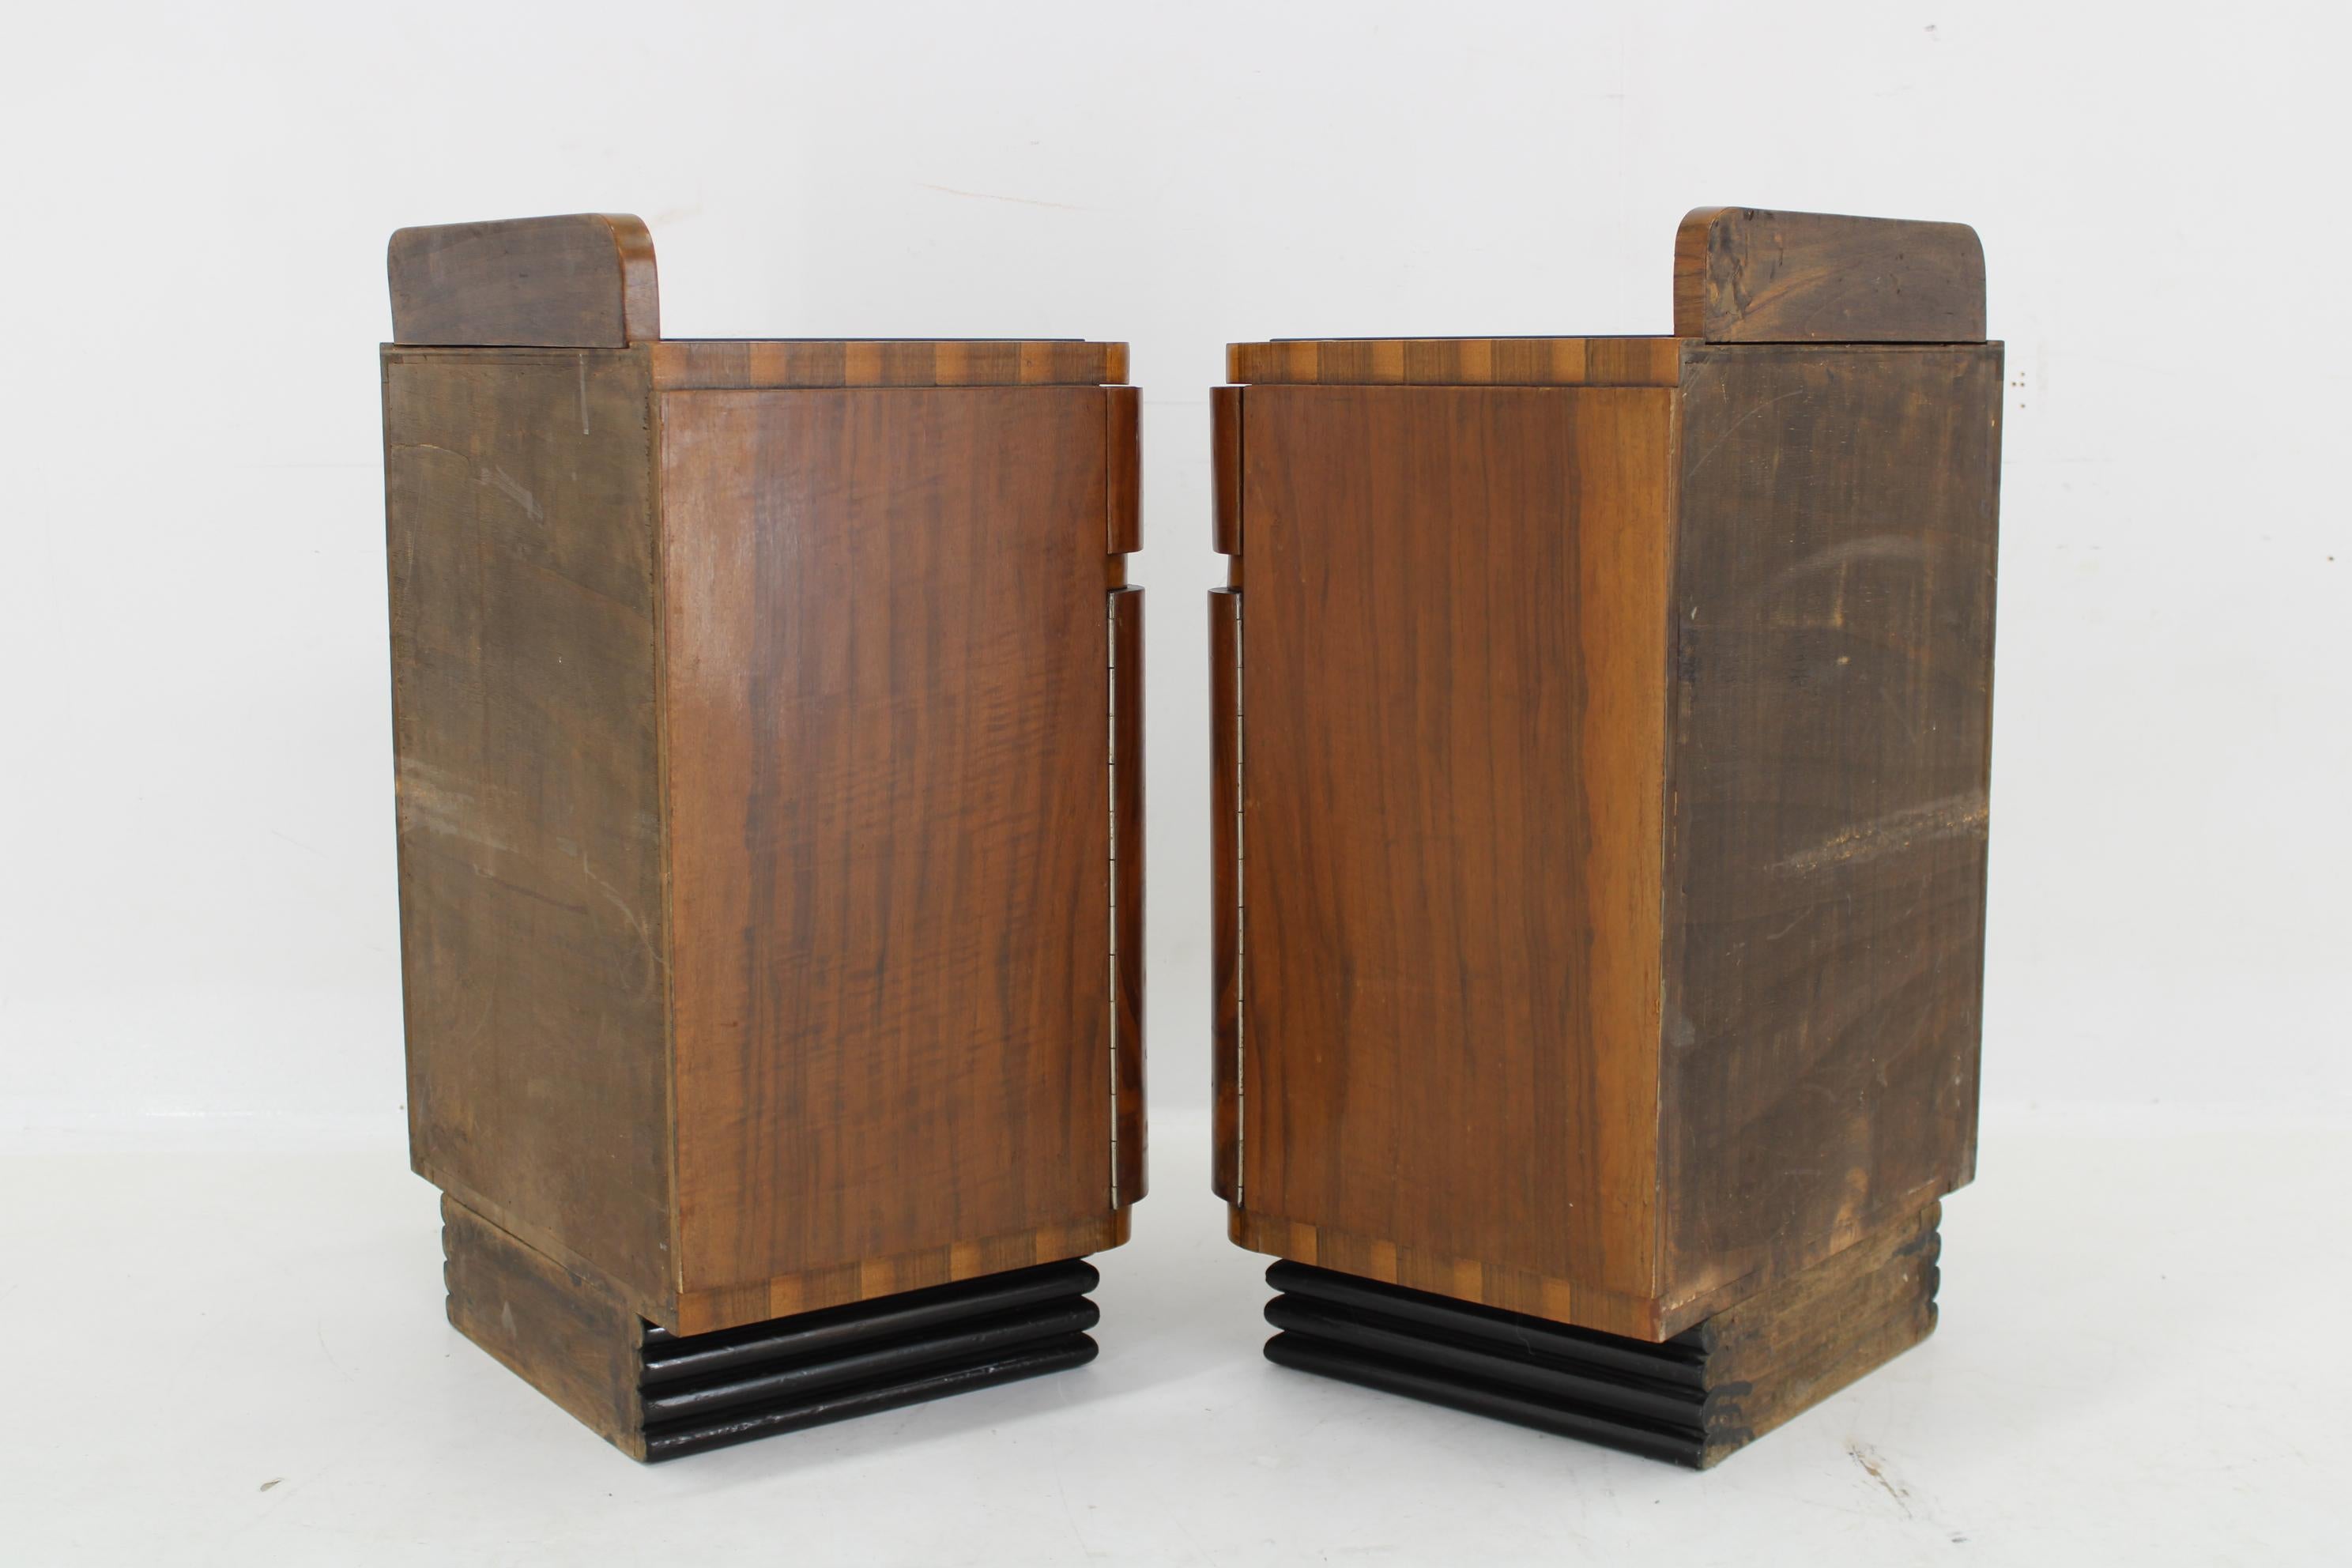 1940s Pair of Art Deco Nightstands in Walnut Finish, Italy For Sale 5